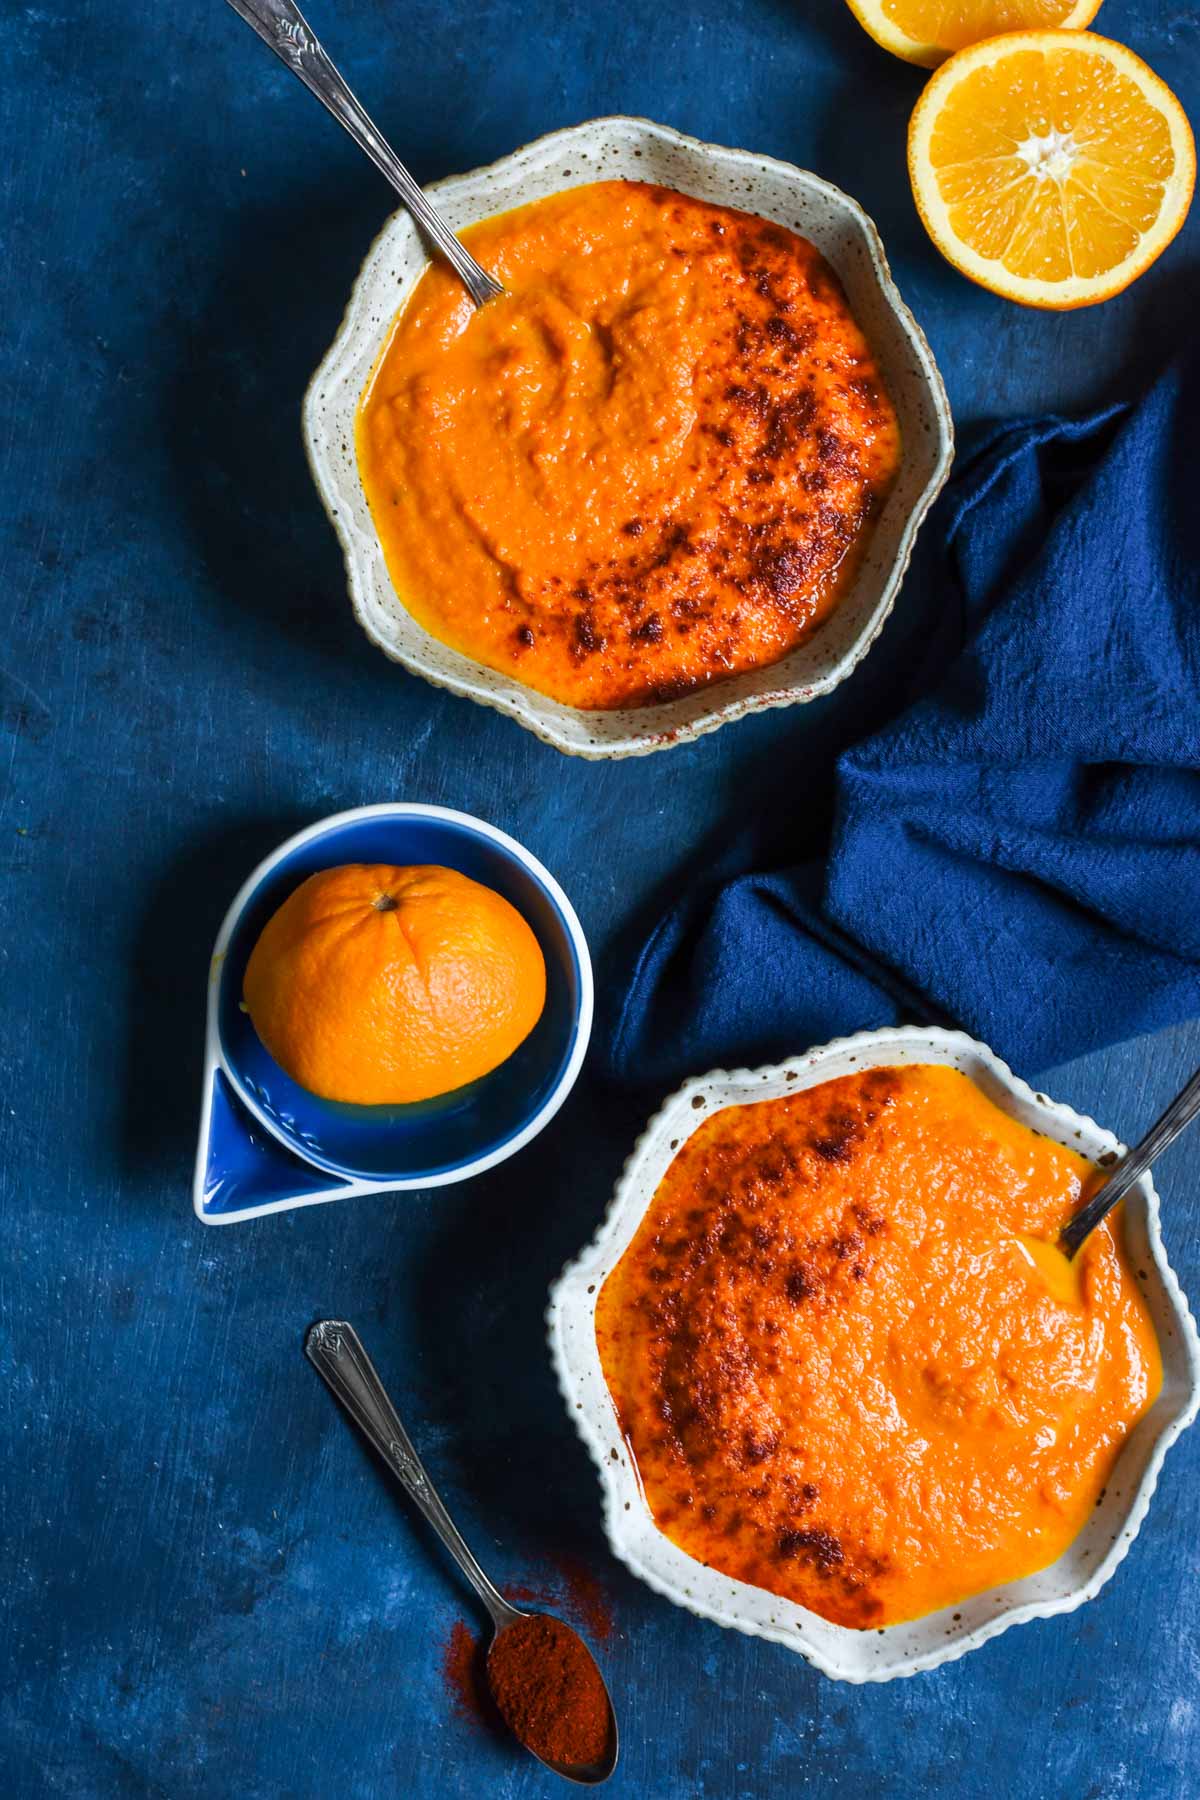 Move over tomato soup! This Creamy Carrot Orange Soup is rich, filling, and the perfect accompaniment for a grilled cheese!